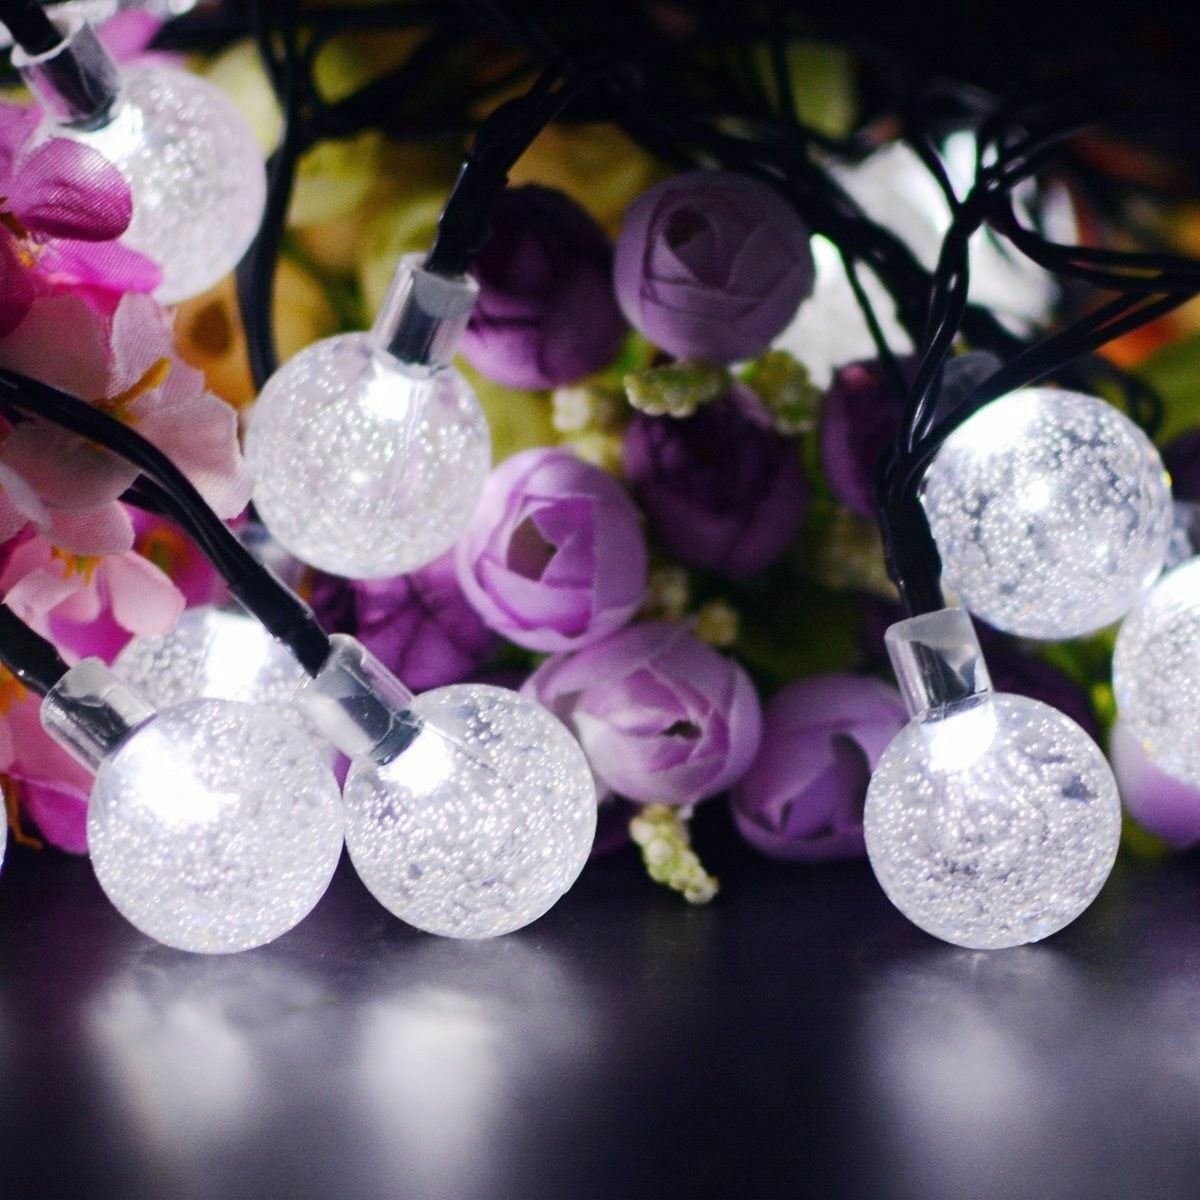 20ft 30 LED Solar String Ball Lights Outdoor Waterproof Warm White Garden Decor LINKPAL Does Not Apply - фотография #8